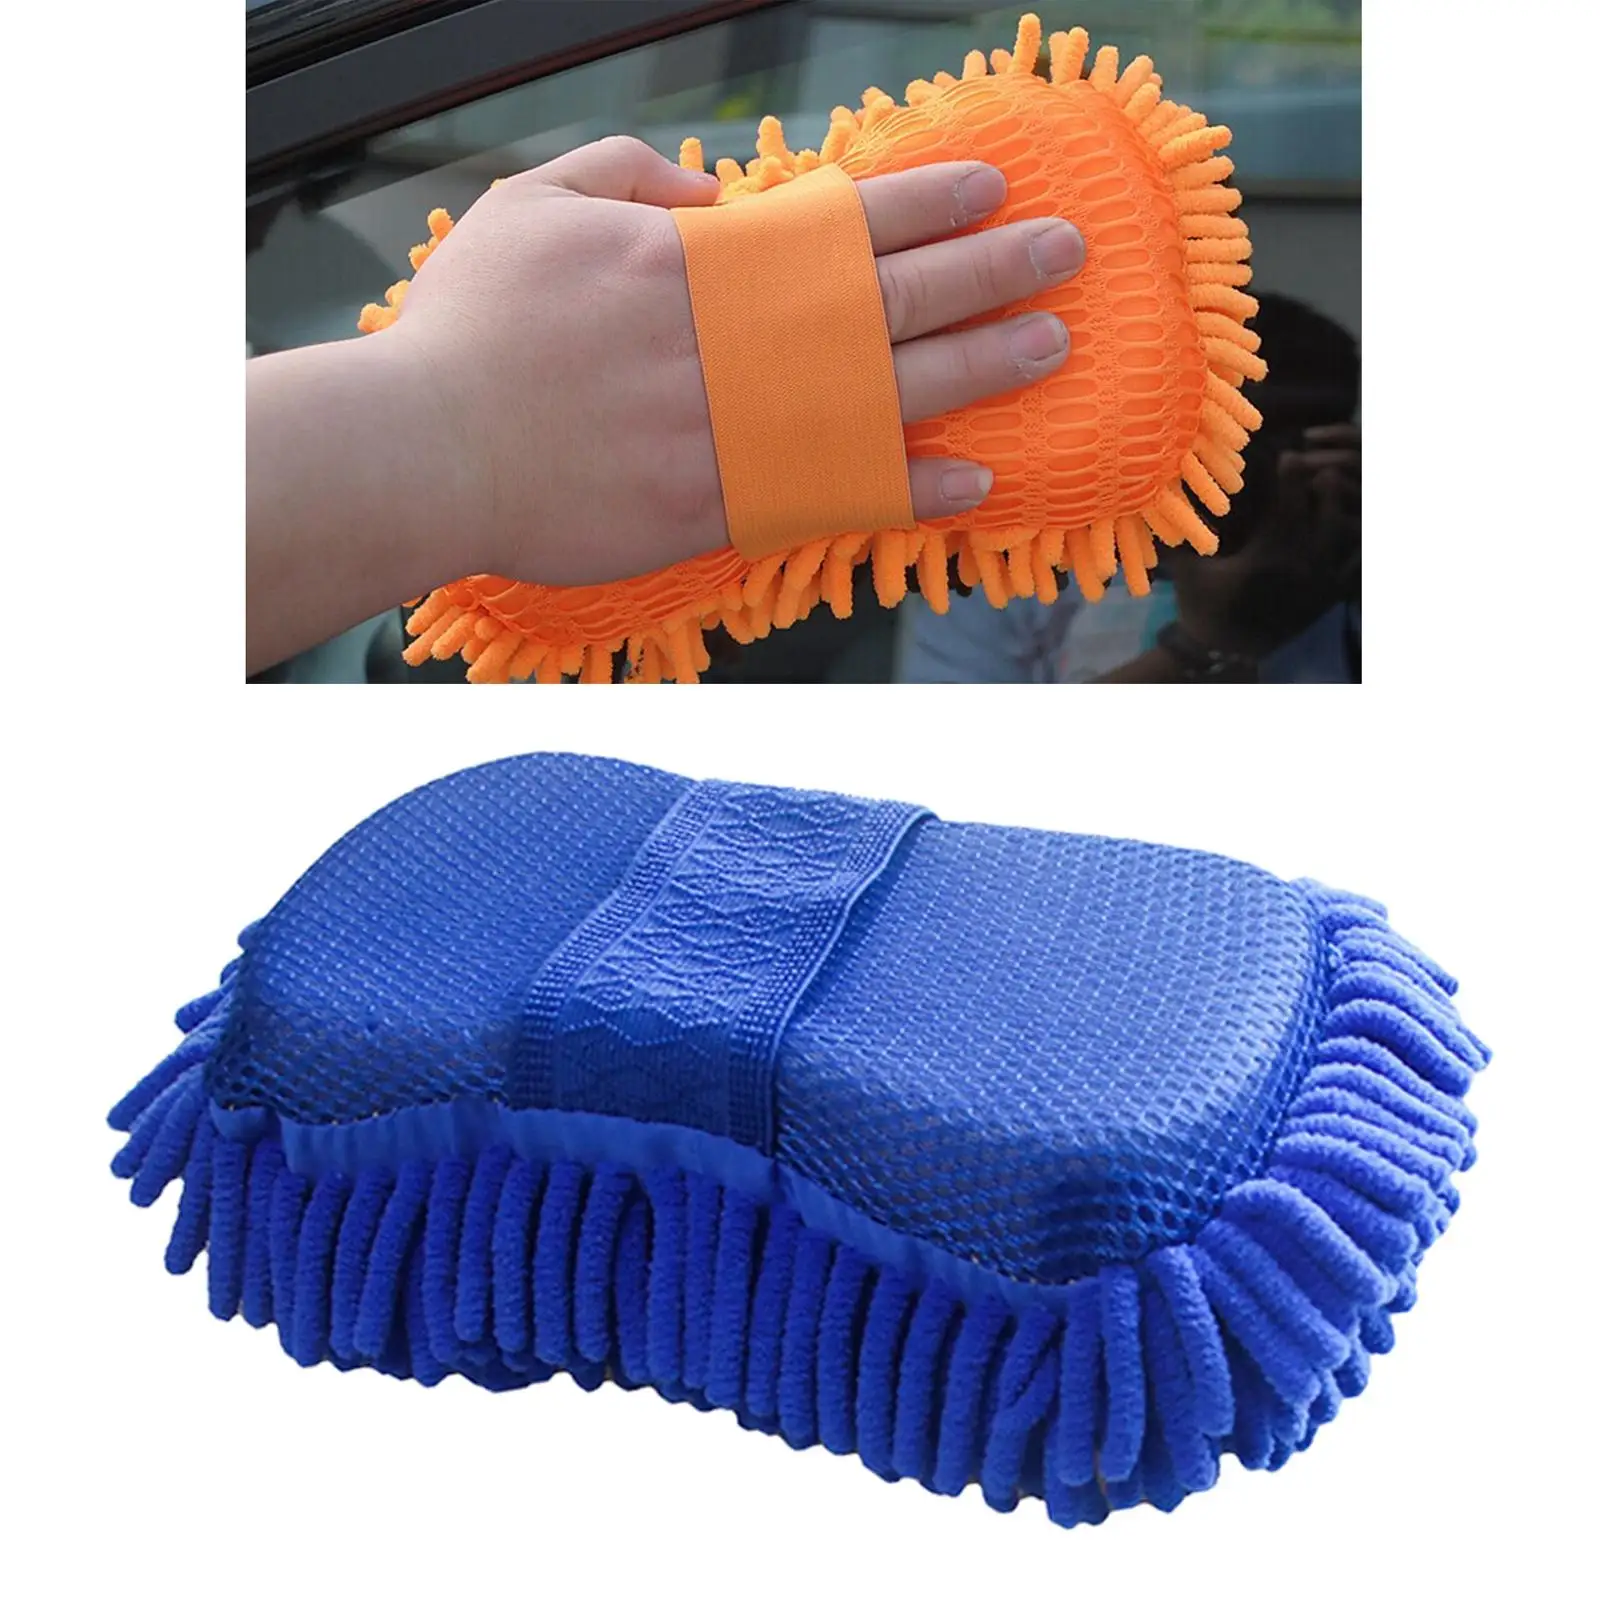 Car Washing Soft Sponge Cleaning and Dusting Machine Washed and Reused